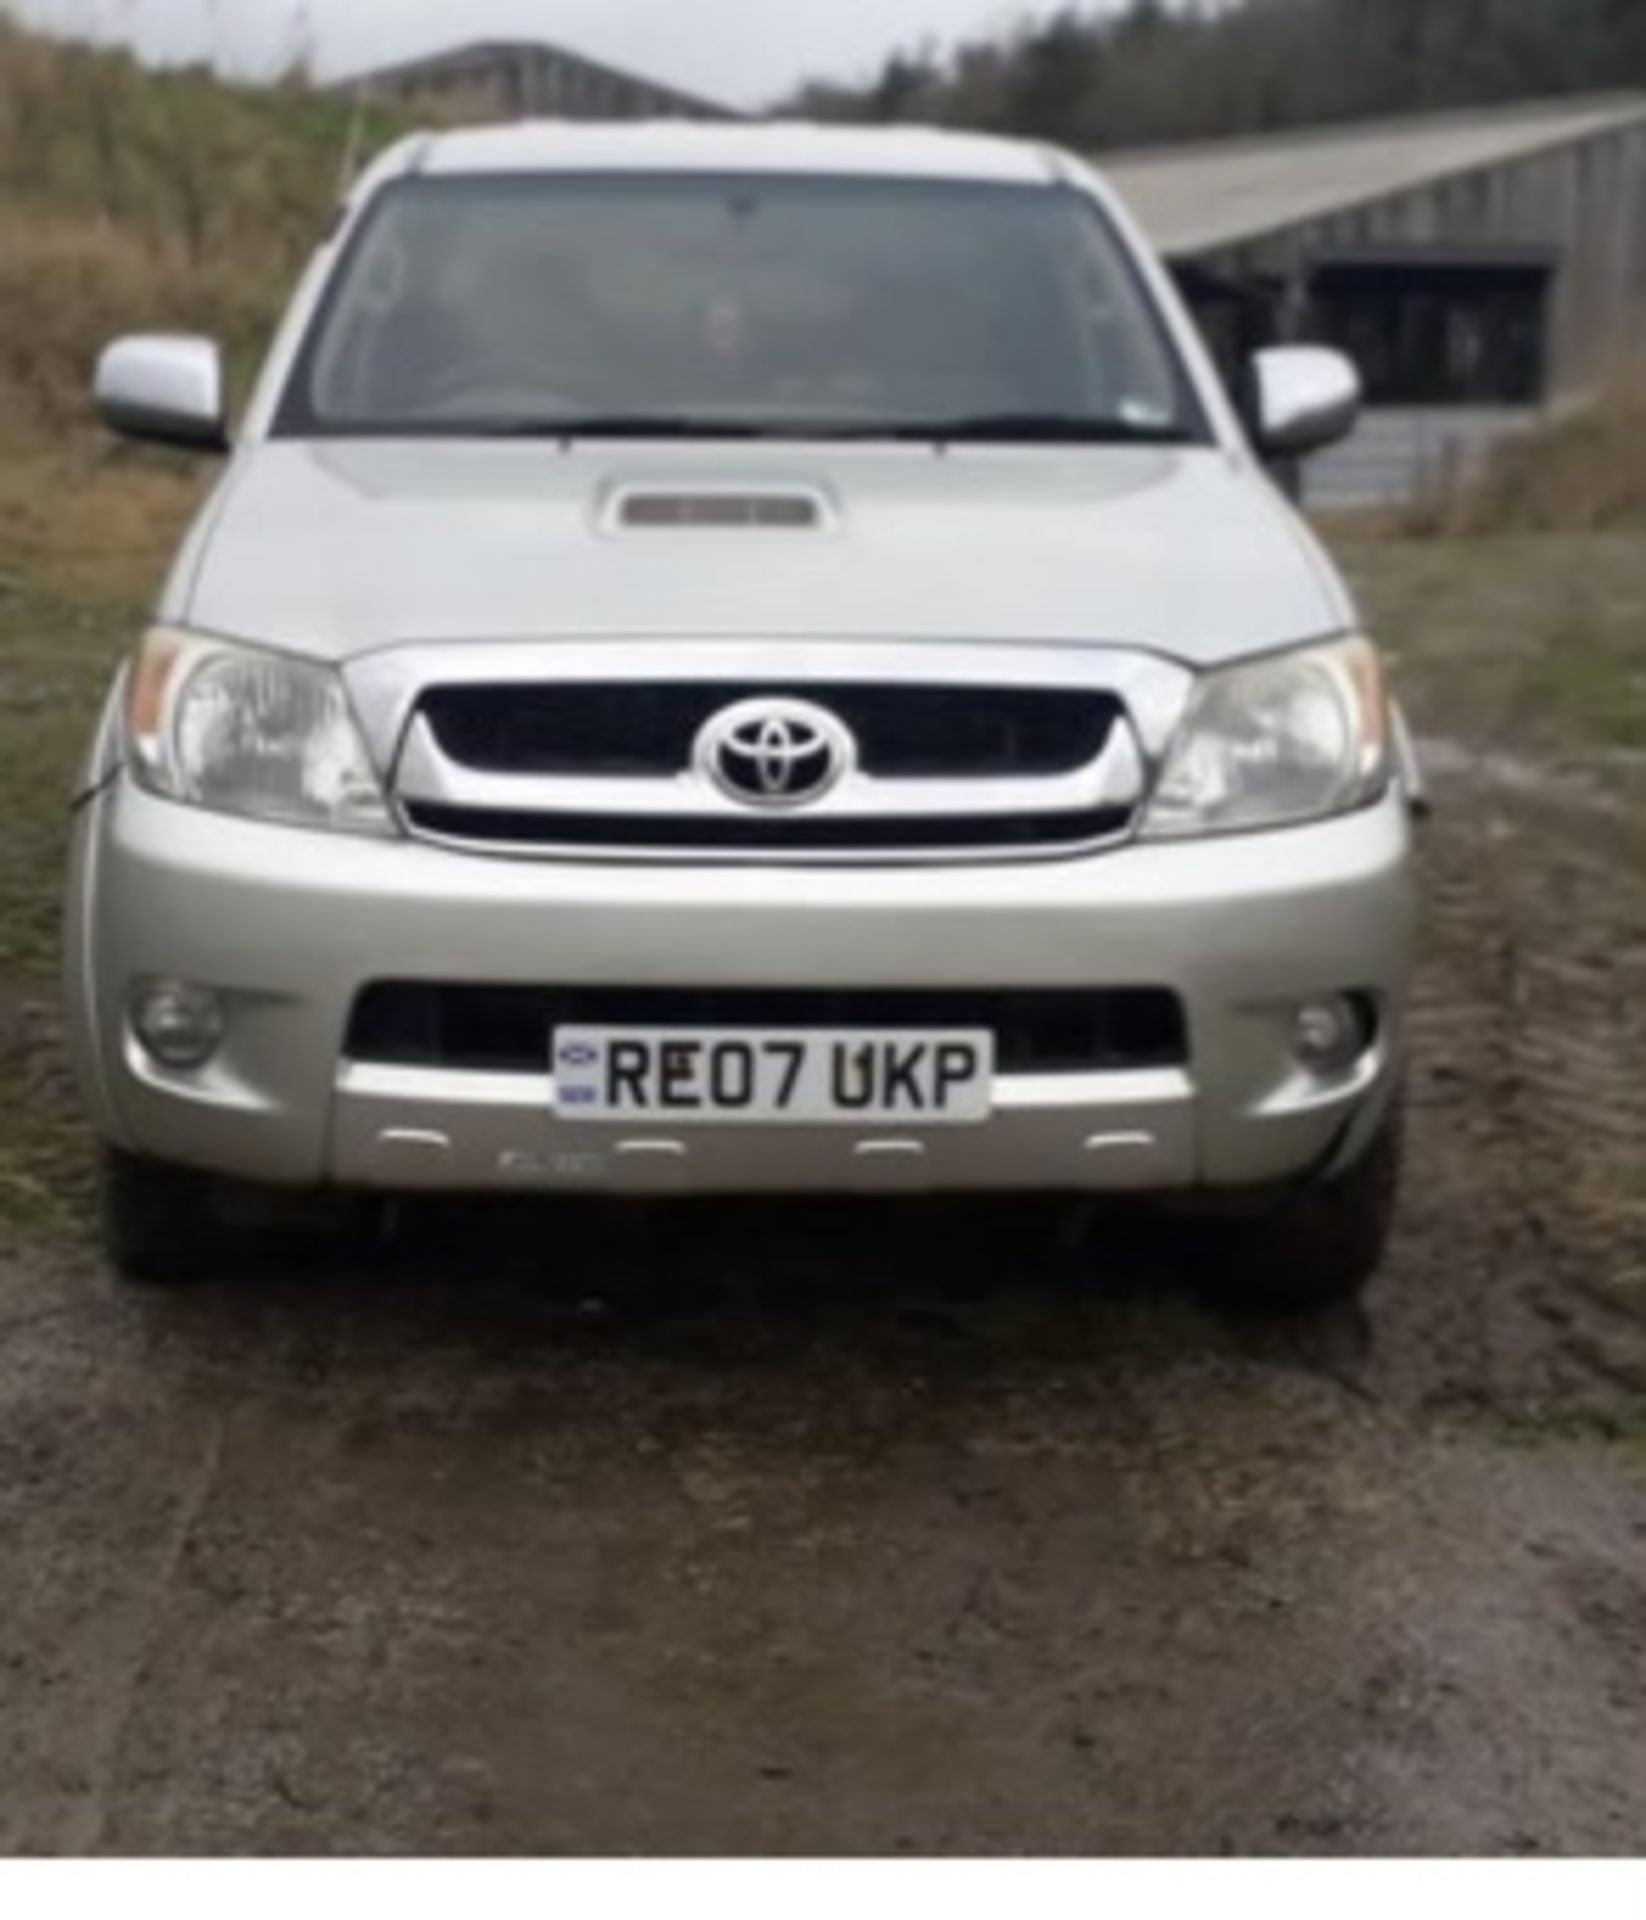 TOYOTA HILUX INVINCIBLE 2007 3.0 LITRE DIESEL LOCATION NORTHERN IRELAND. - Image 2 of 7